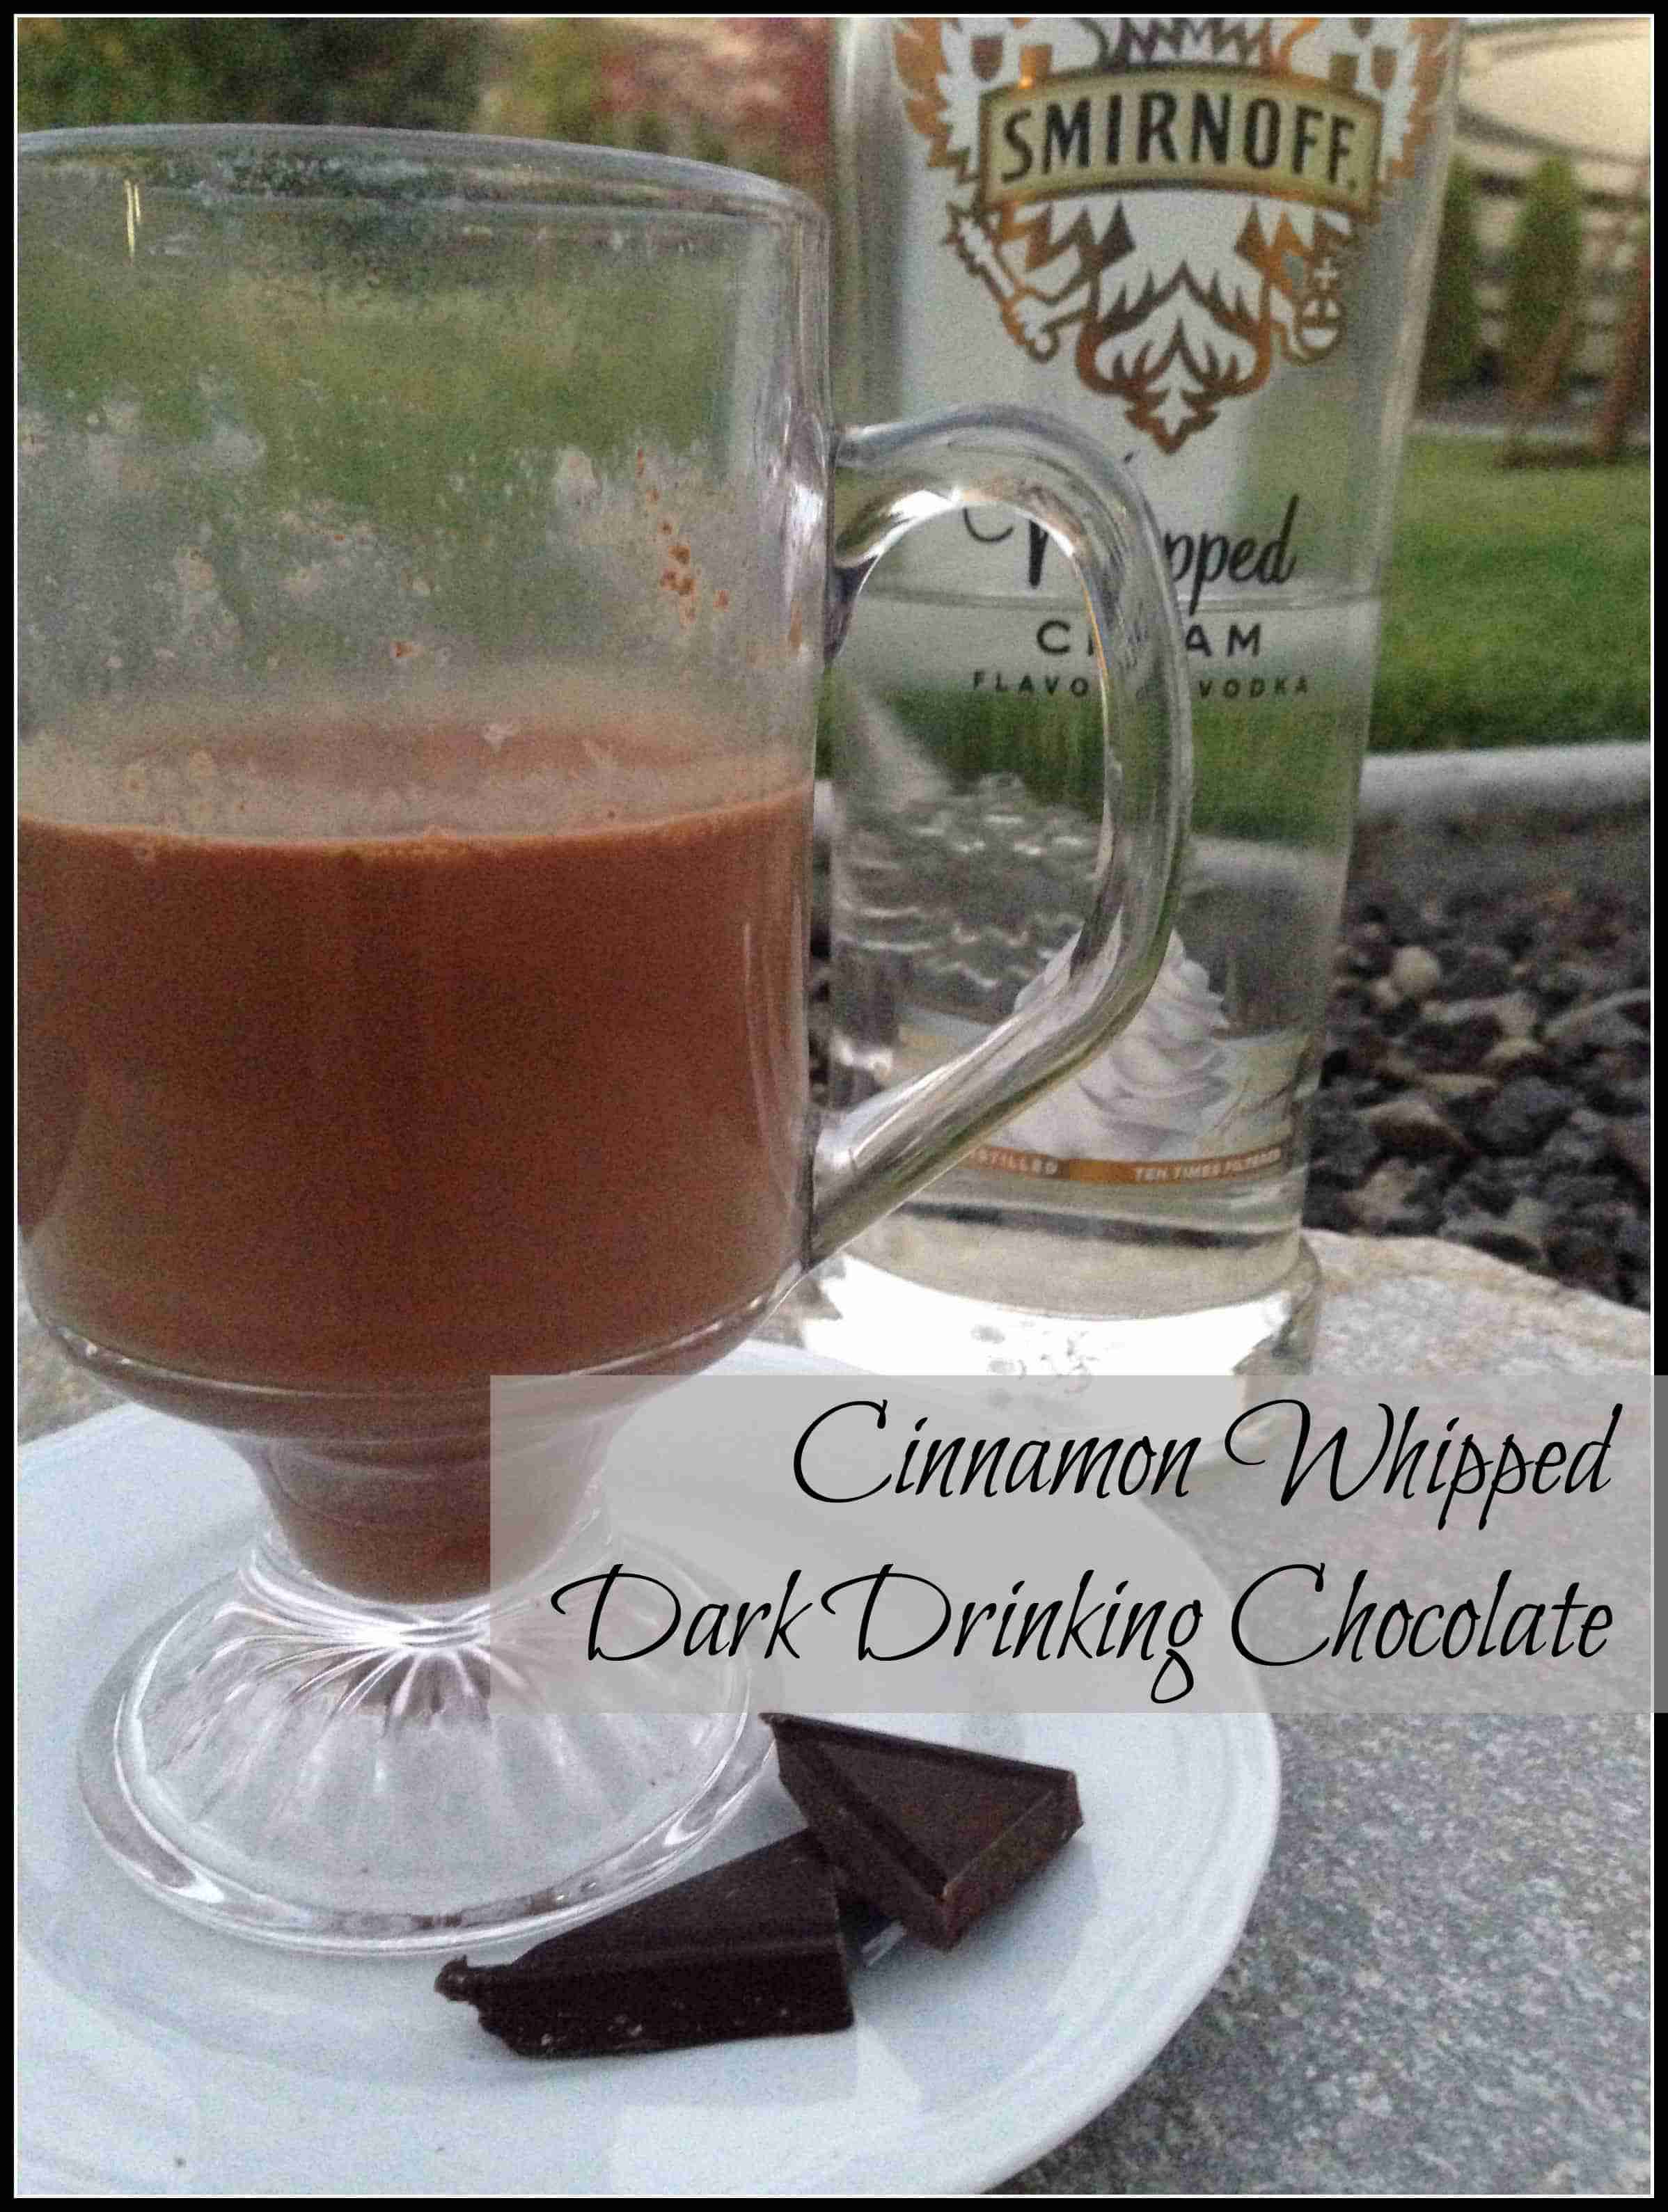 Cinnamon Whipped Dark Drinking Chocolate with Anolon Cookware